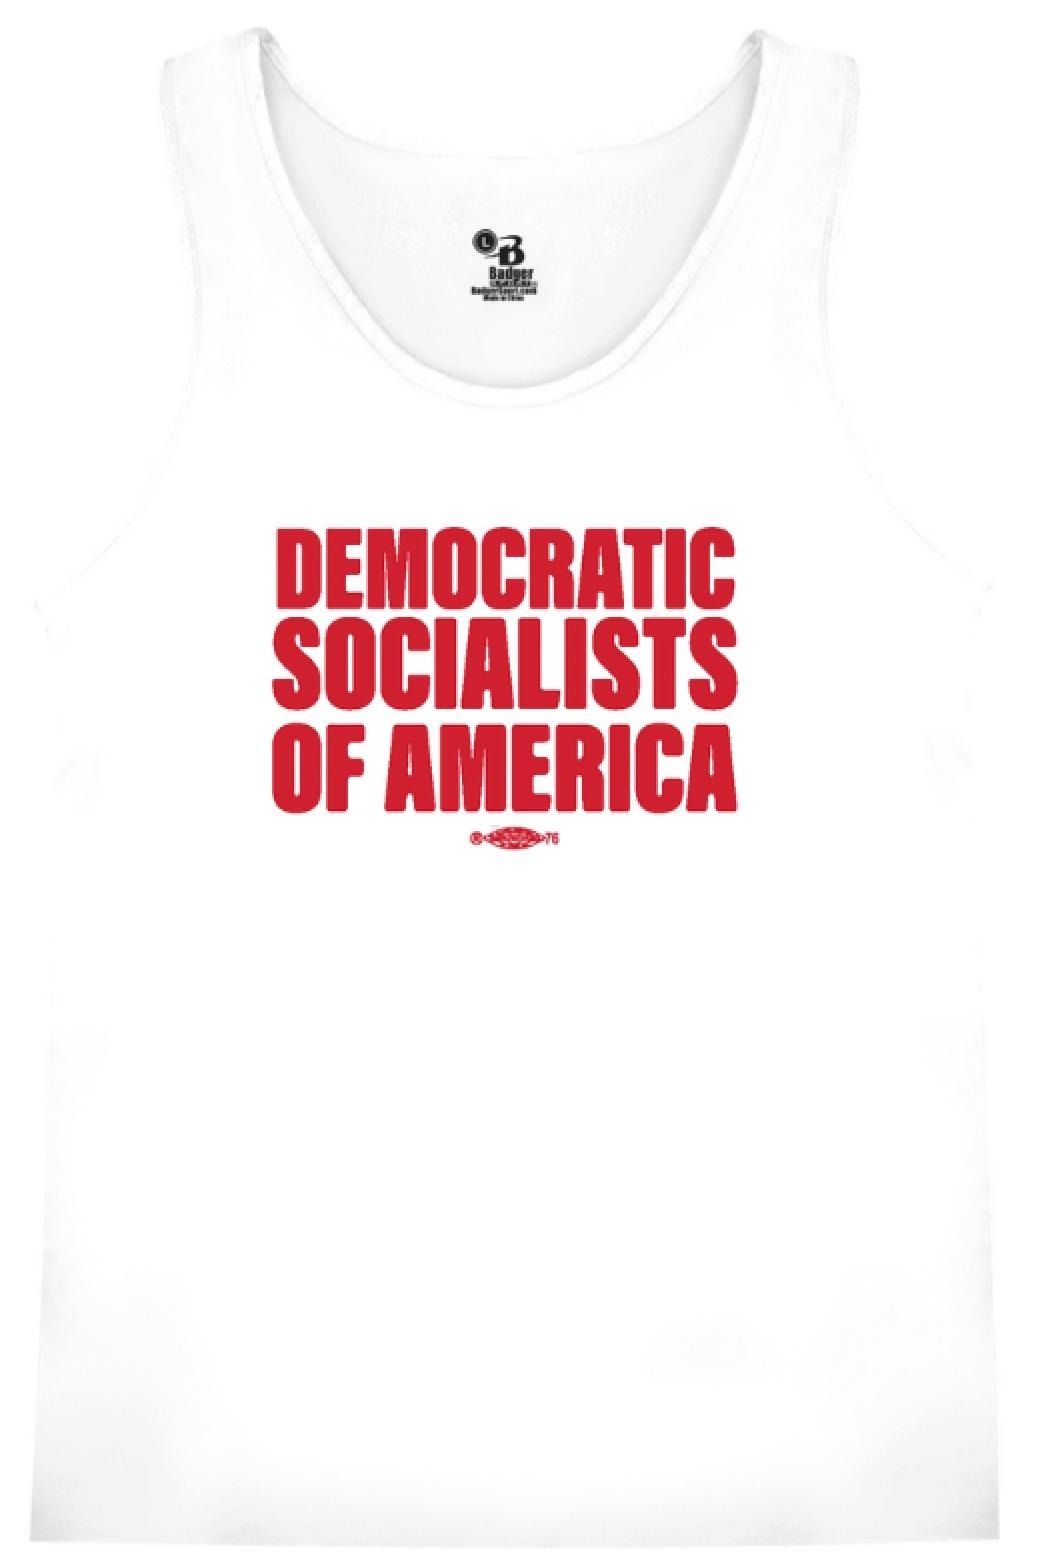 White tank top with red text DEMOCRATIC SOCIALISTS OF AMERICA and union bug